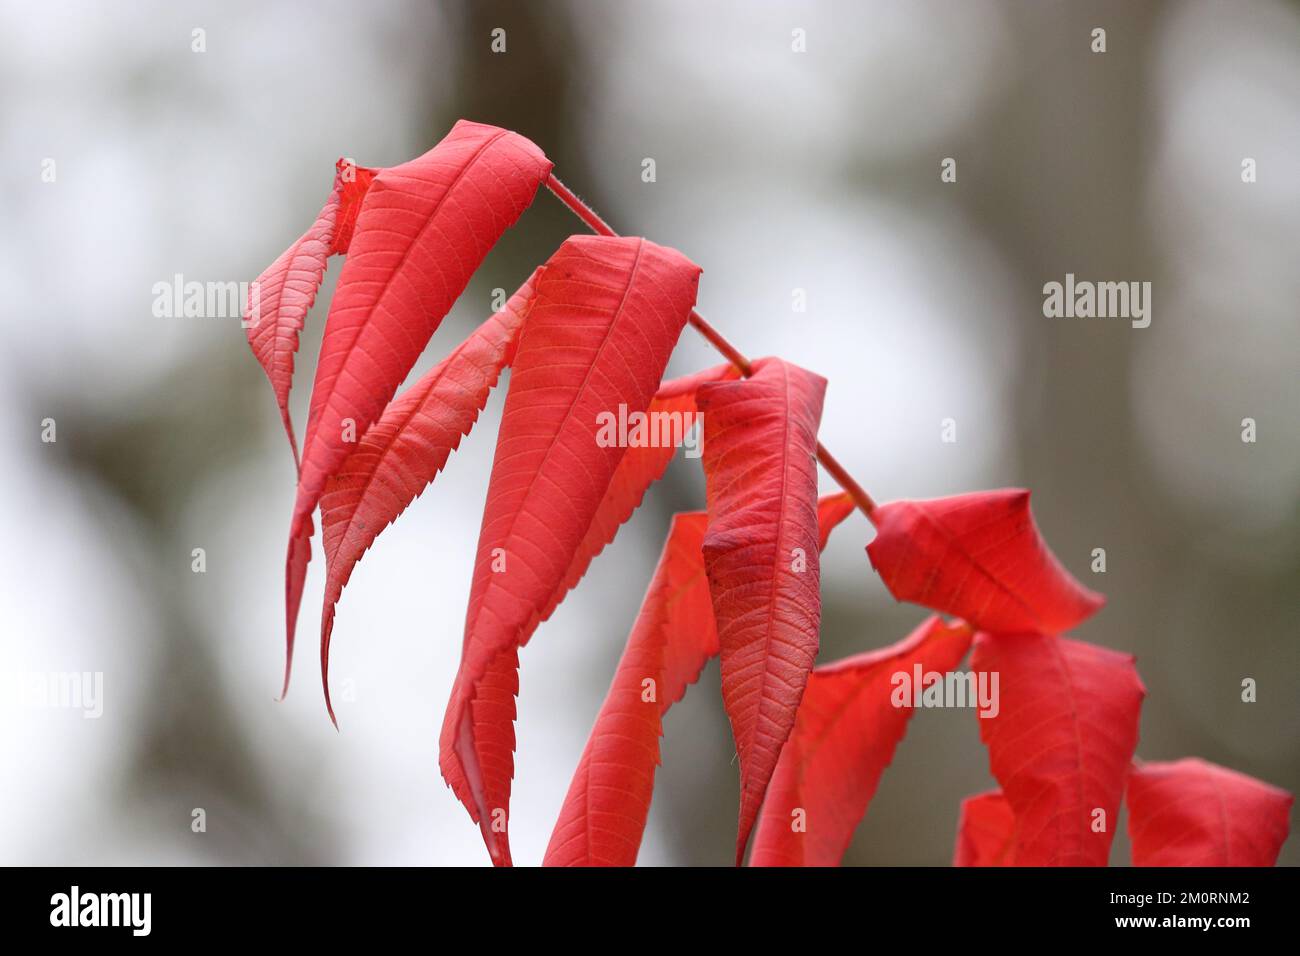 A closeup of staghorn sumac red leaves against the blurred background Stock Photo